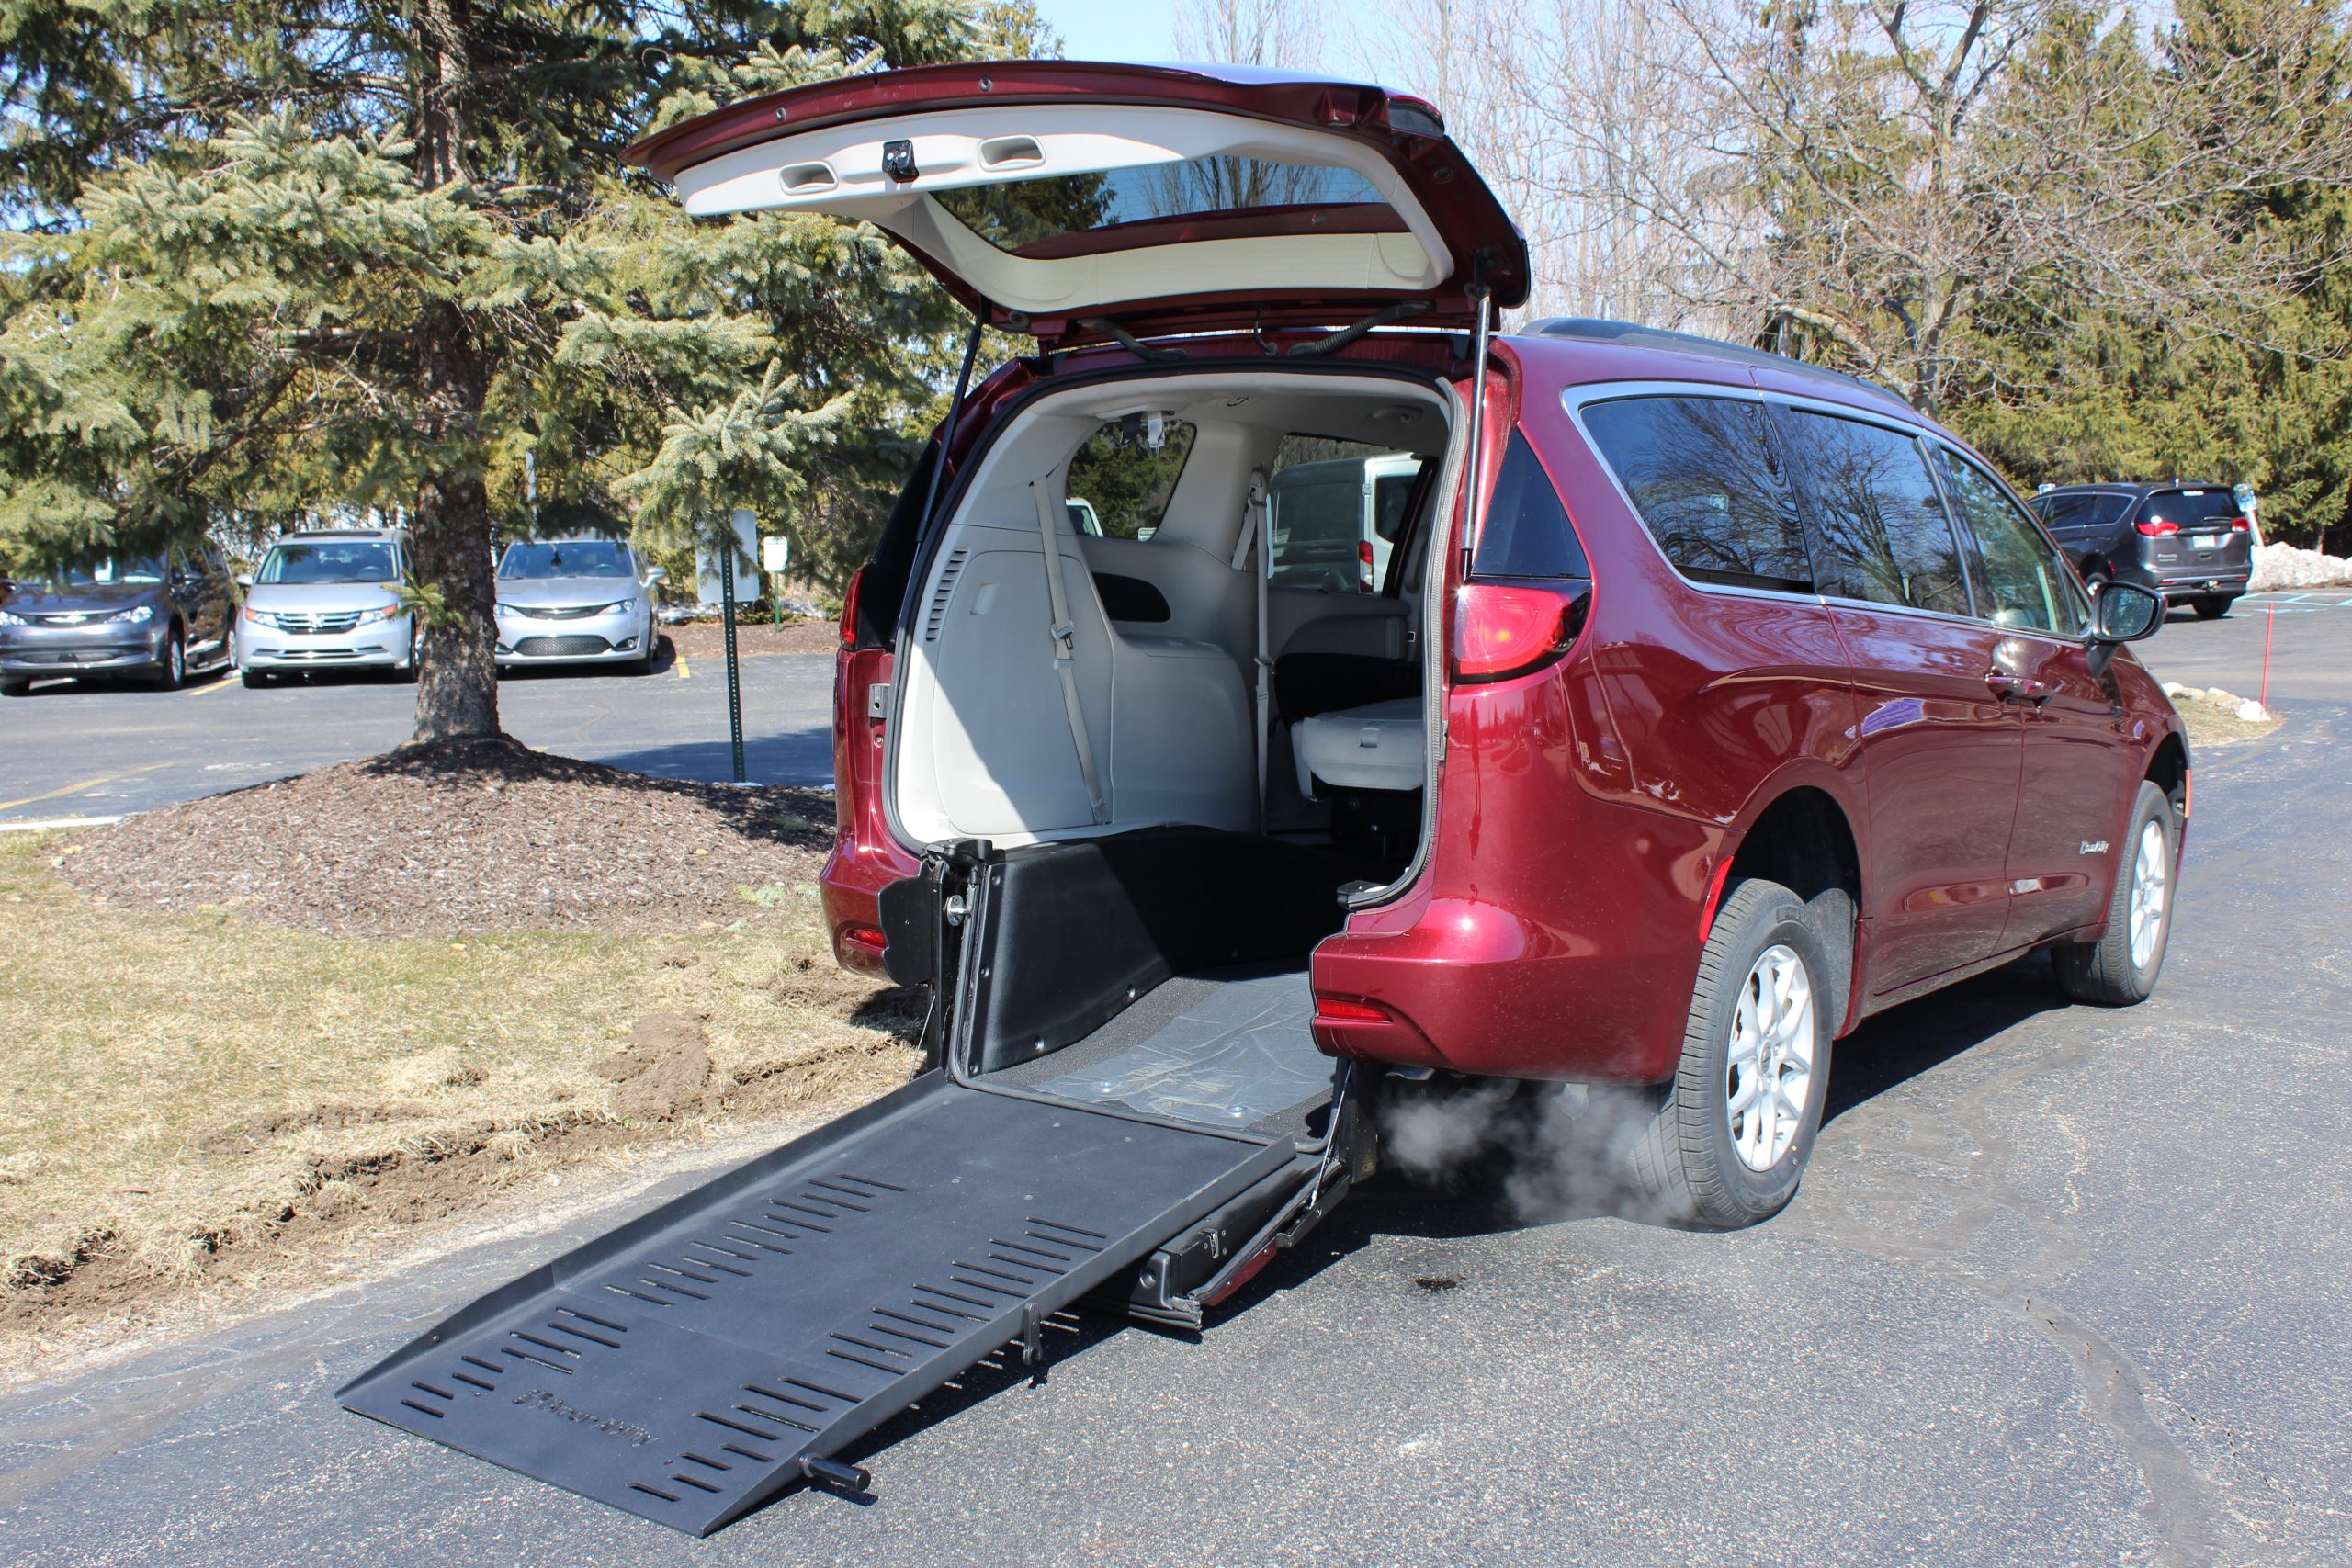 2021 Velvet Red Chrysler Voyager LXI with BraunAbility Rear Entry Conversion